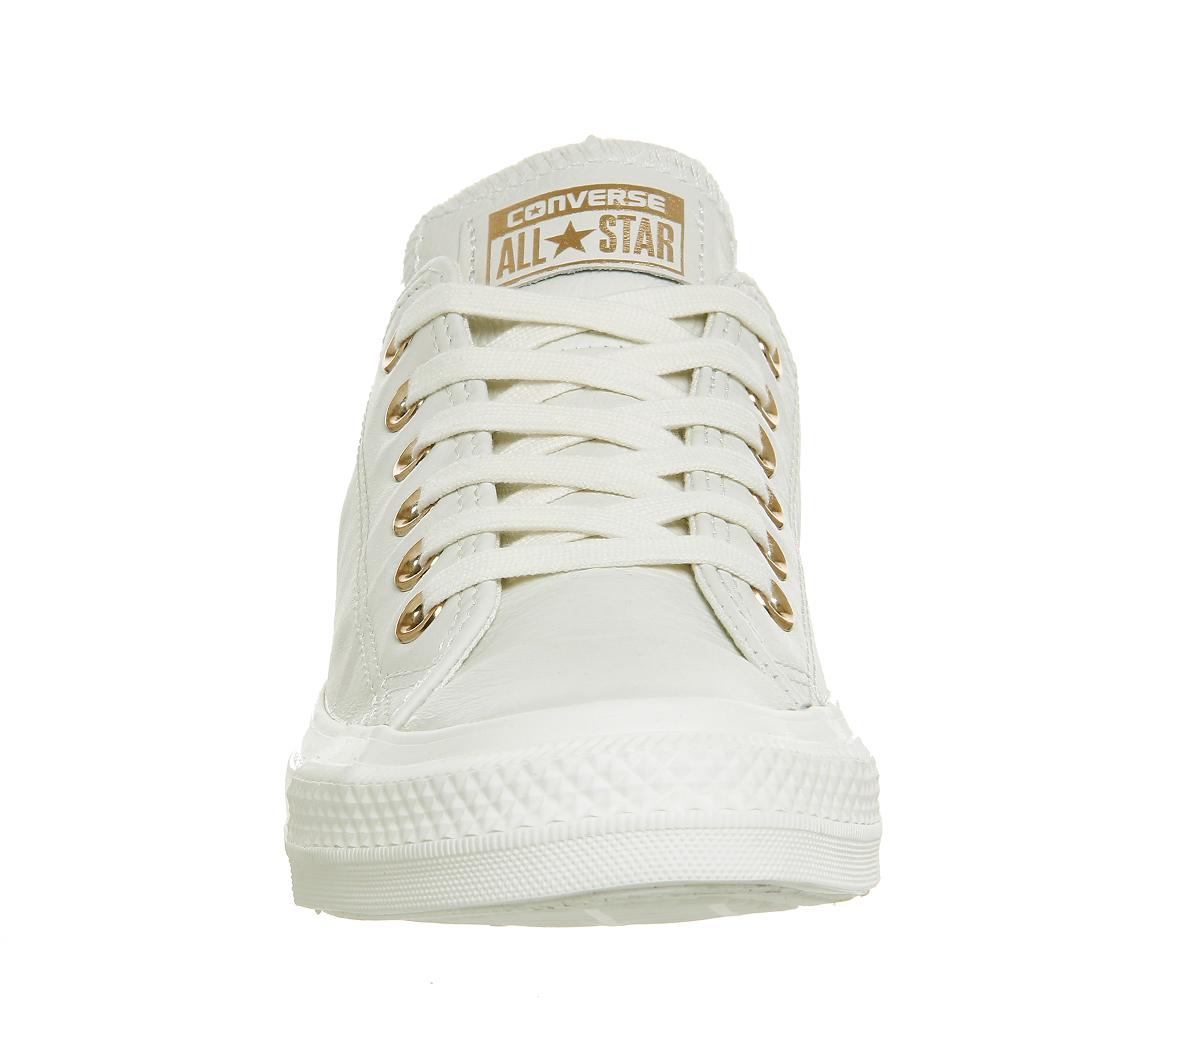 Converse All Star Low Leather Egret 